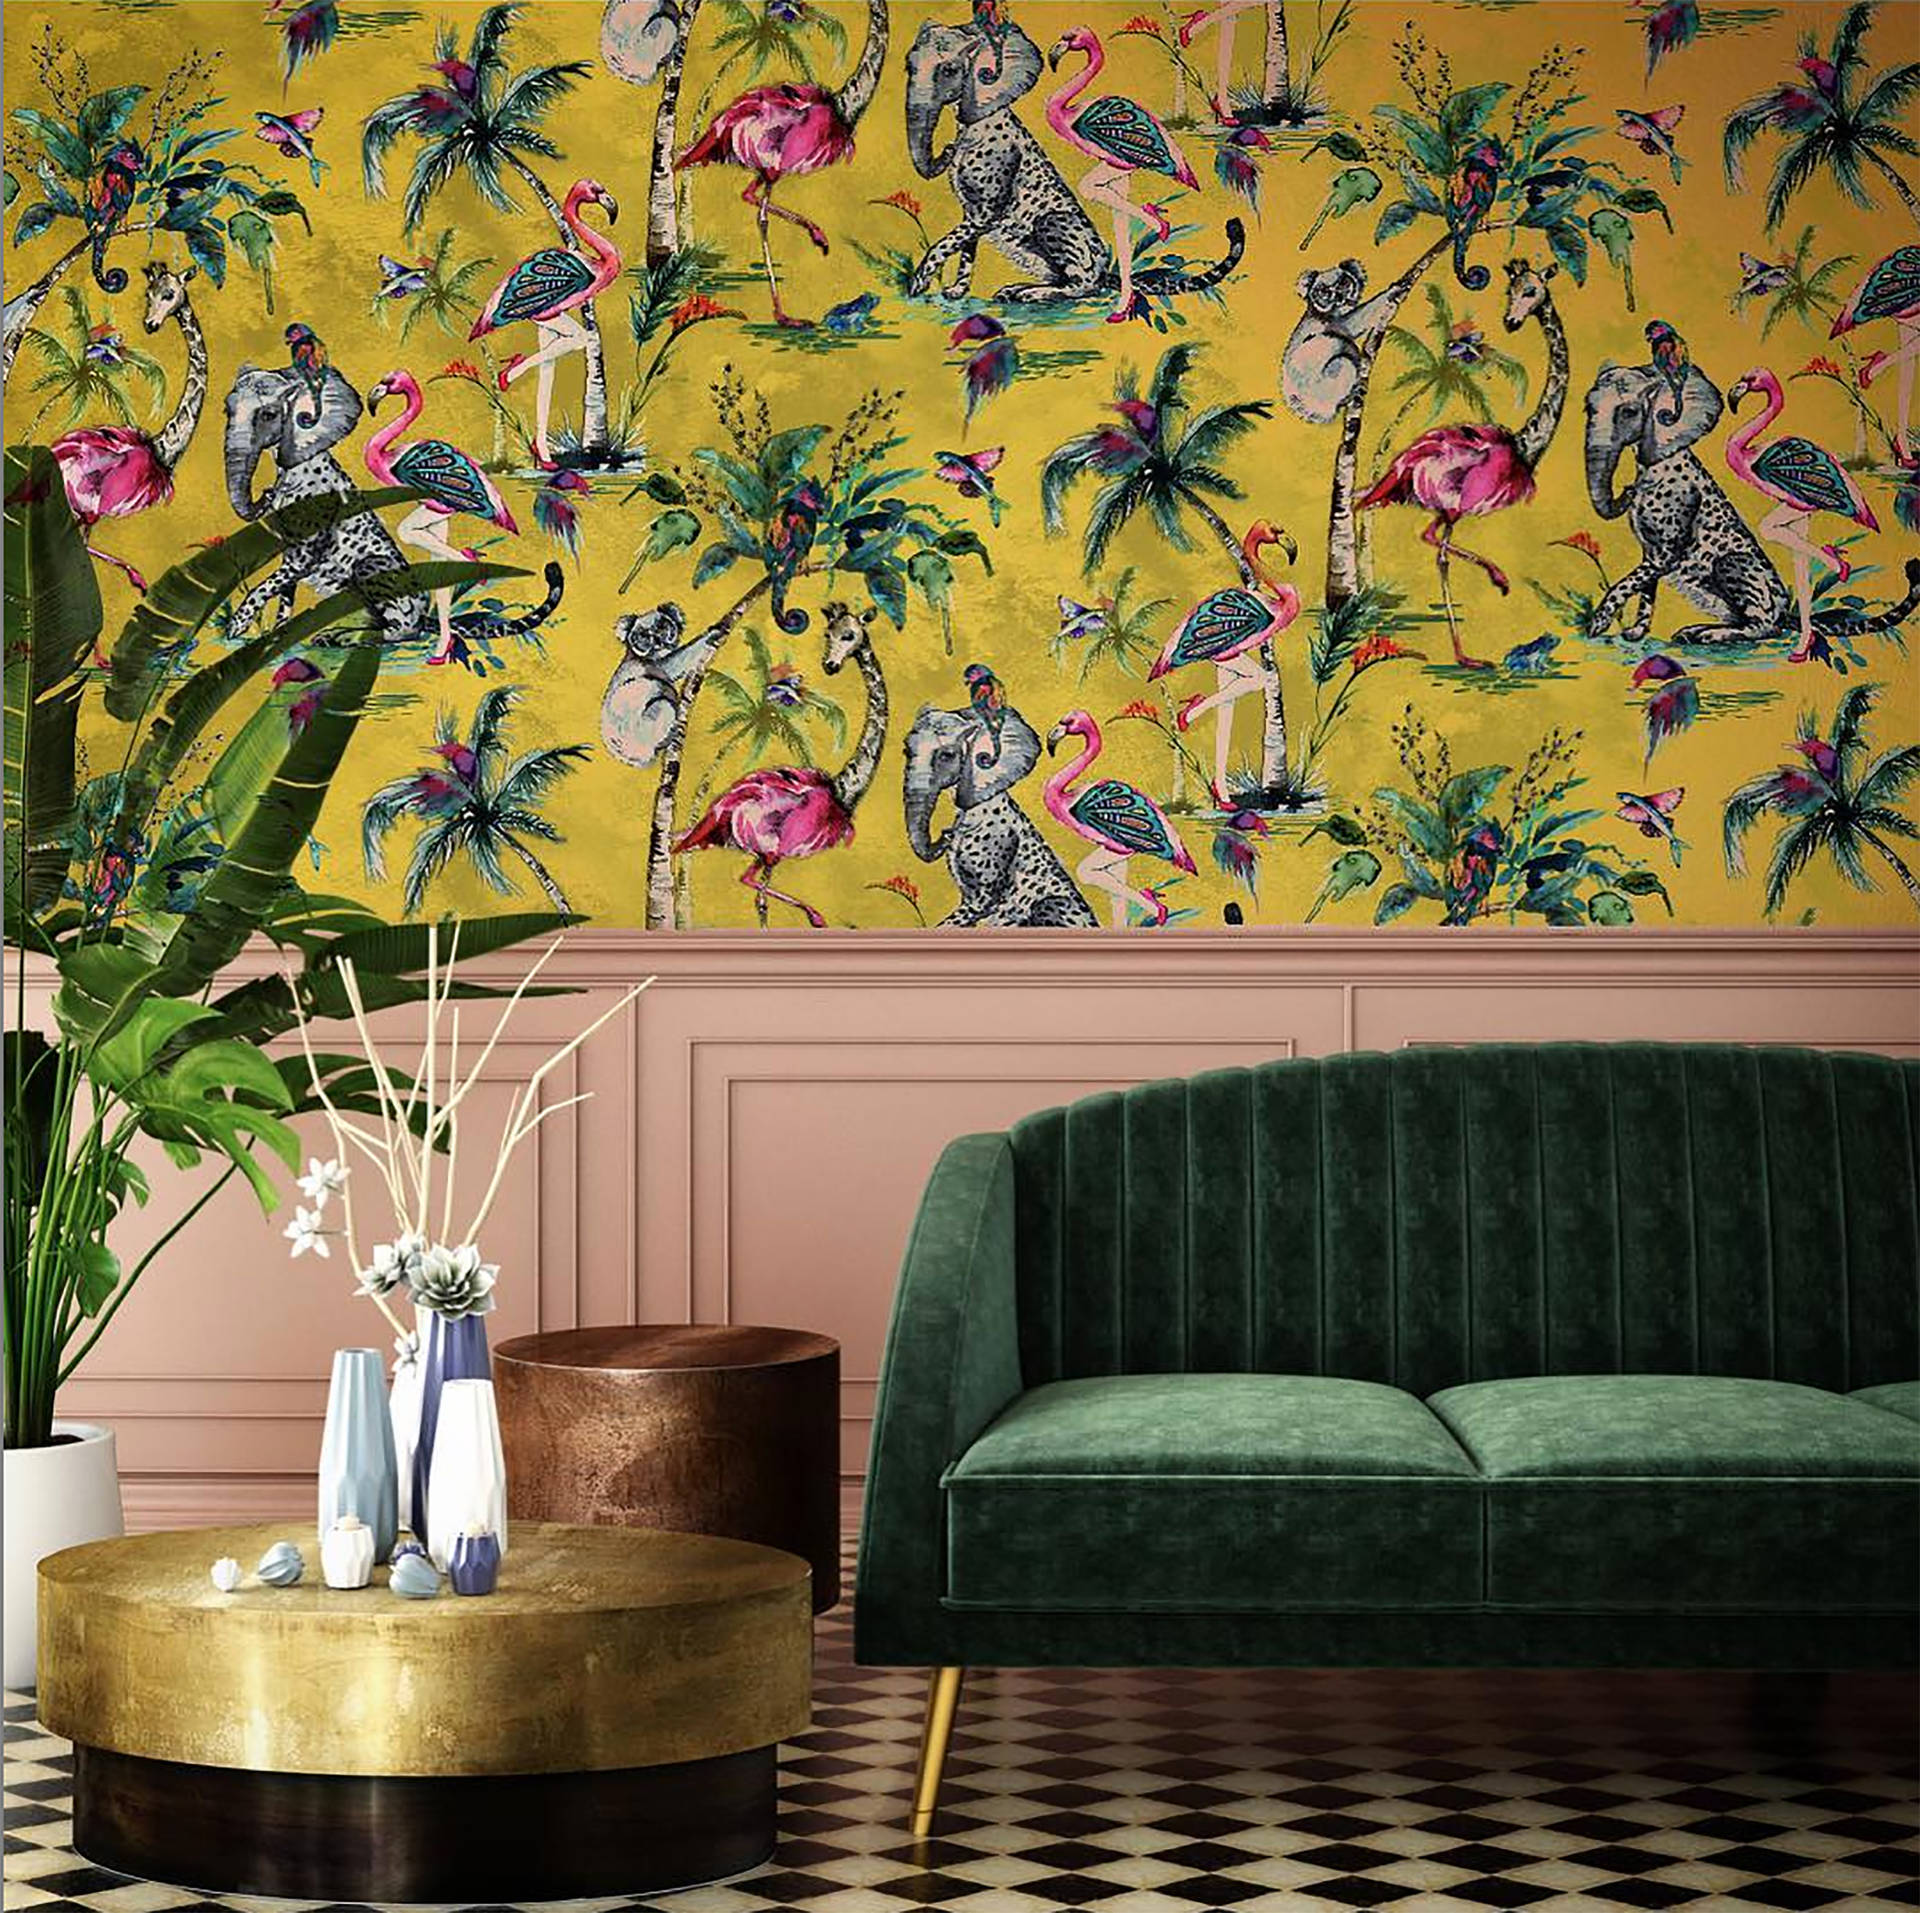 The 11 Best Wallpapers Tested and Reviewed